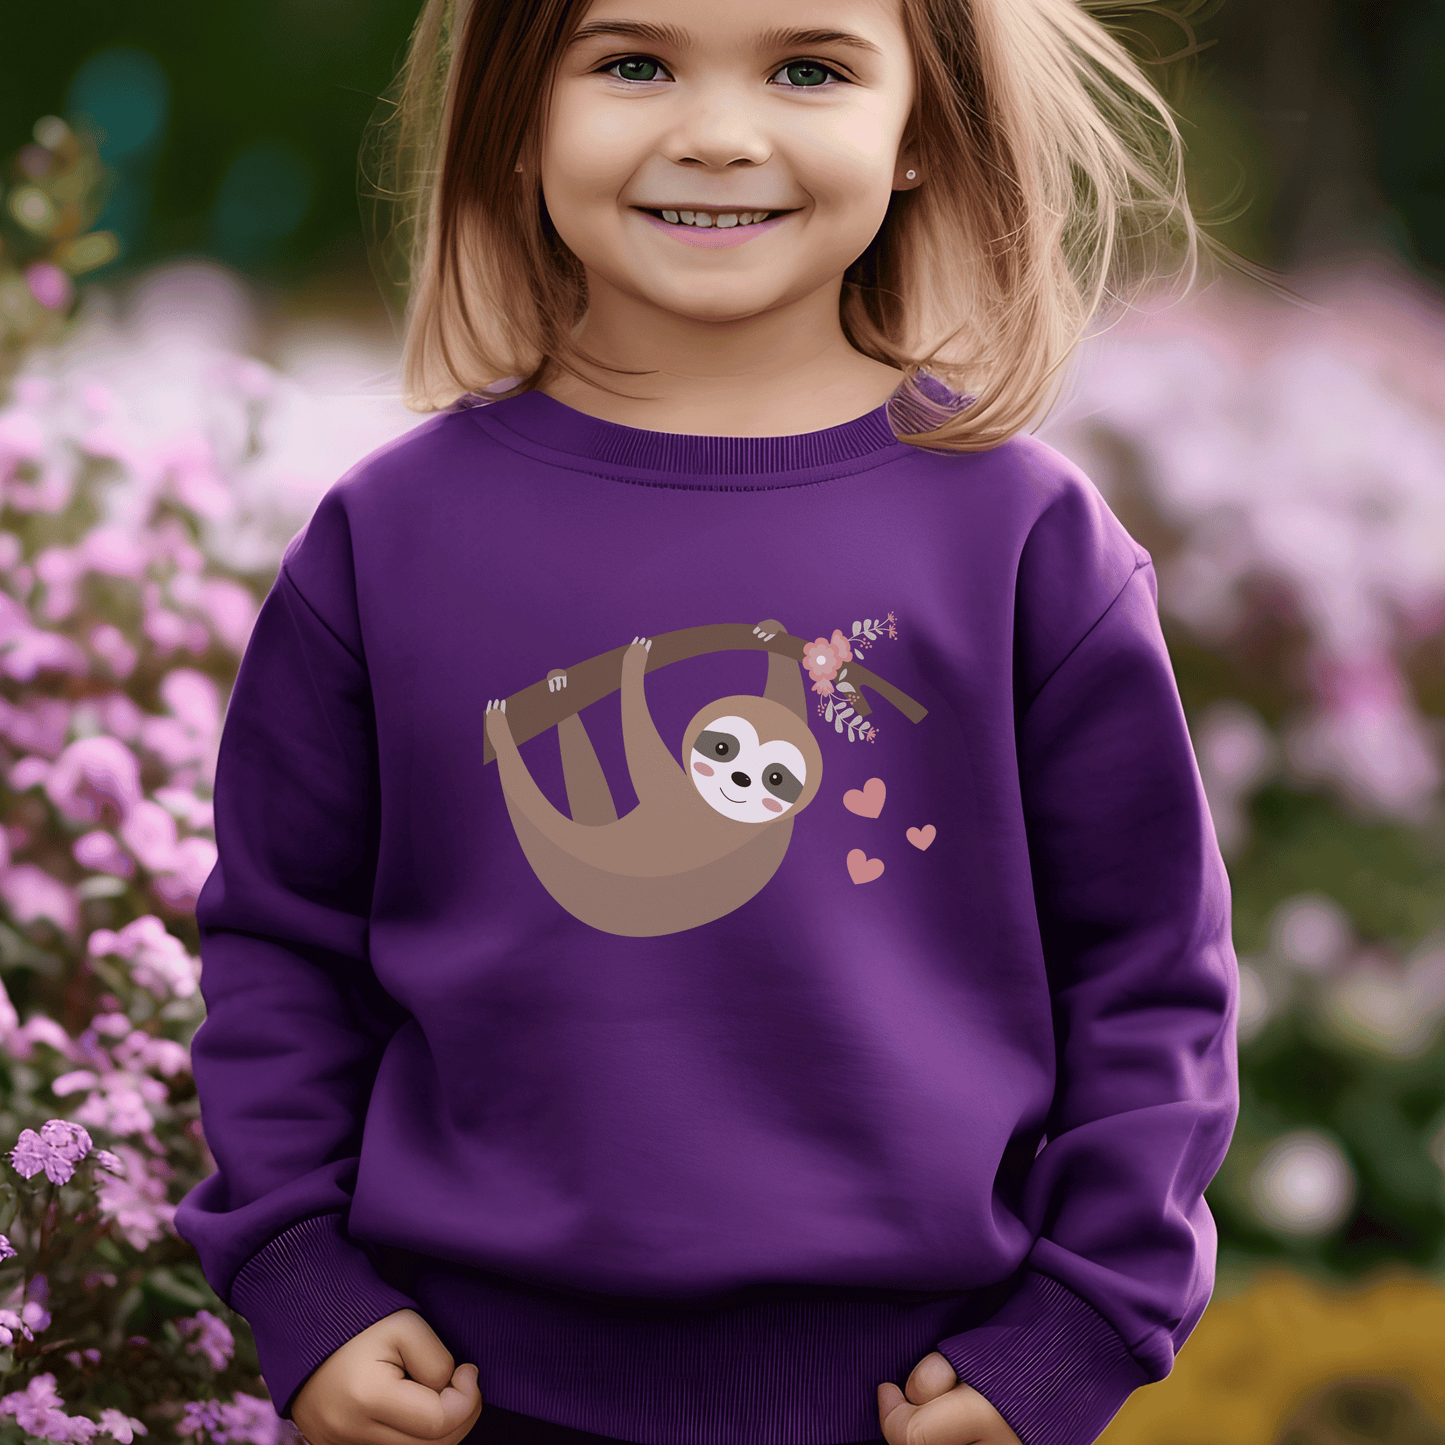 Graphic printed Sloth hanging from a branch with flowers and pink hearts - girls purple sweatshirt jumper